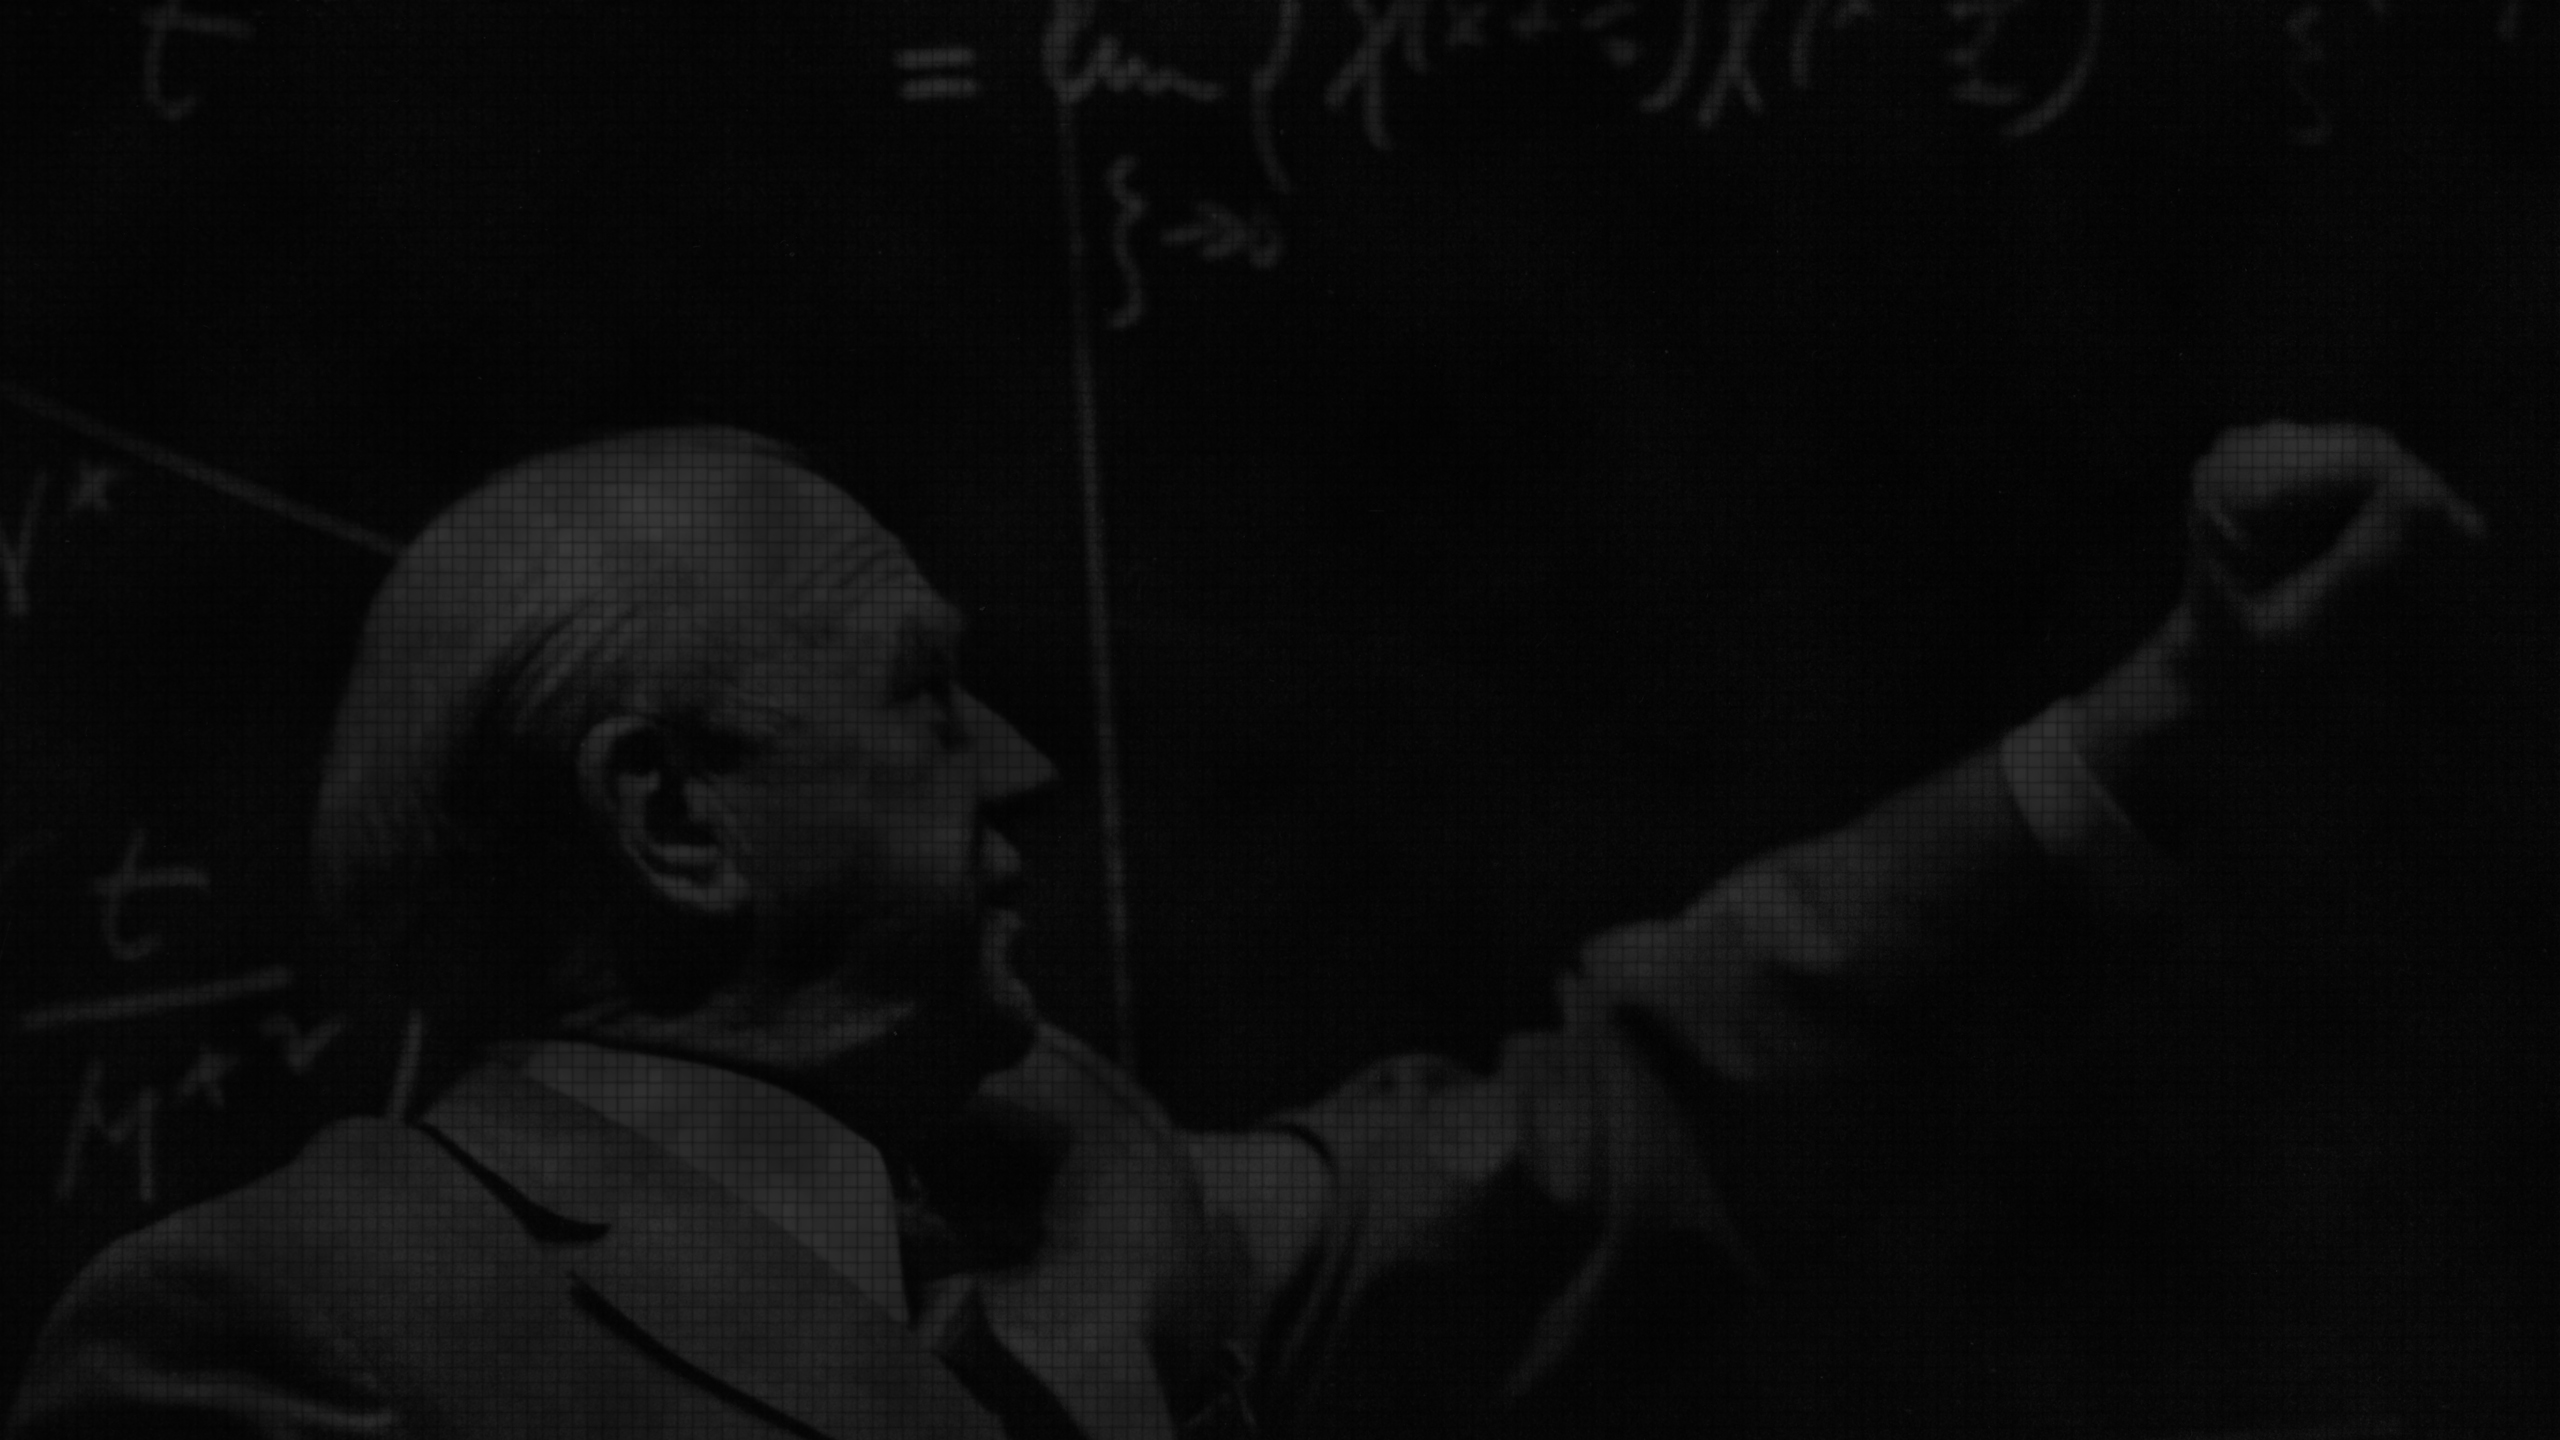 Werner Heisenberg lecturing in front of a blackboard with mathmatical equations.